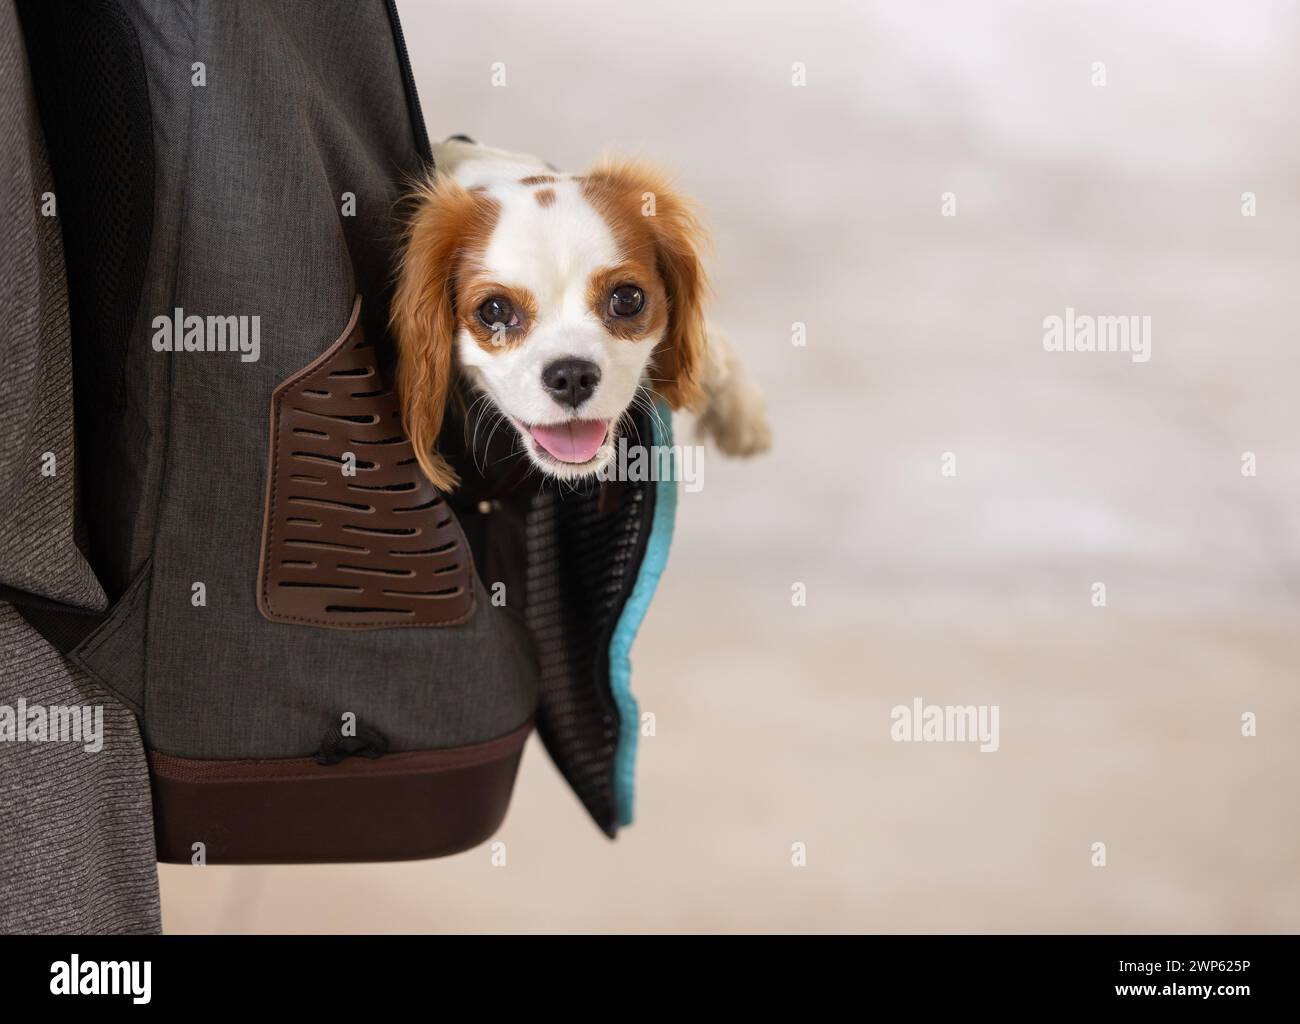 A small Cavalier puppy looking out from a dog backpack Stock Photo